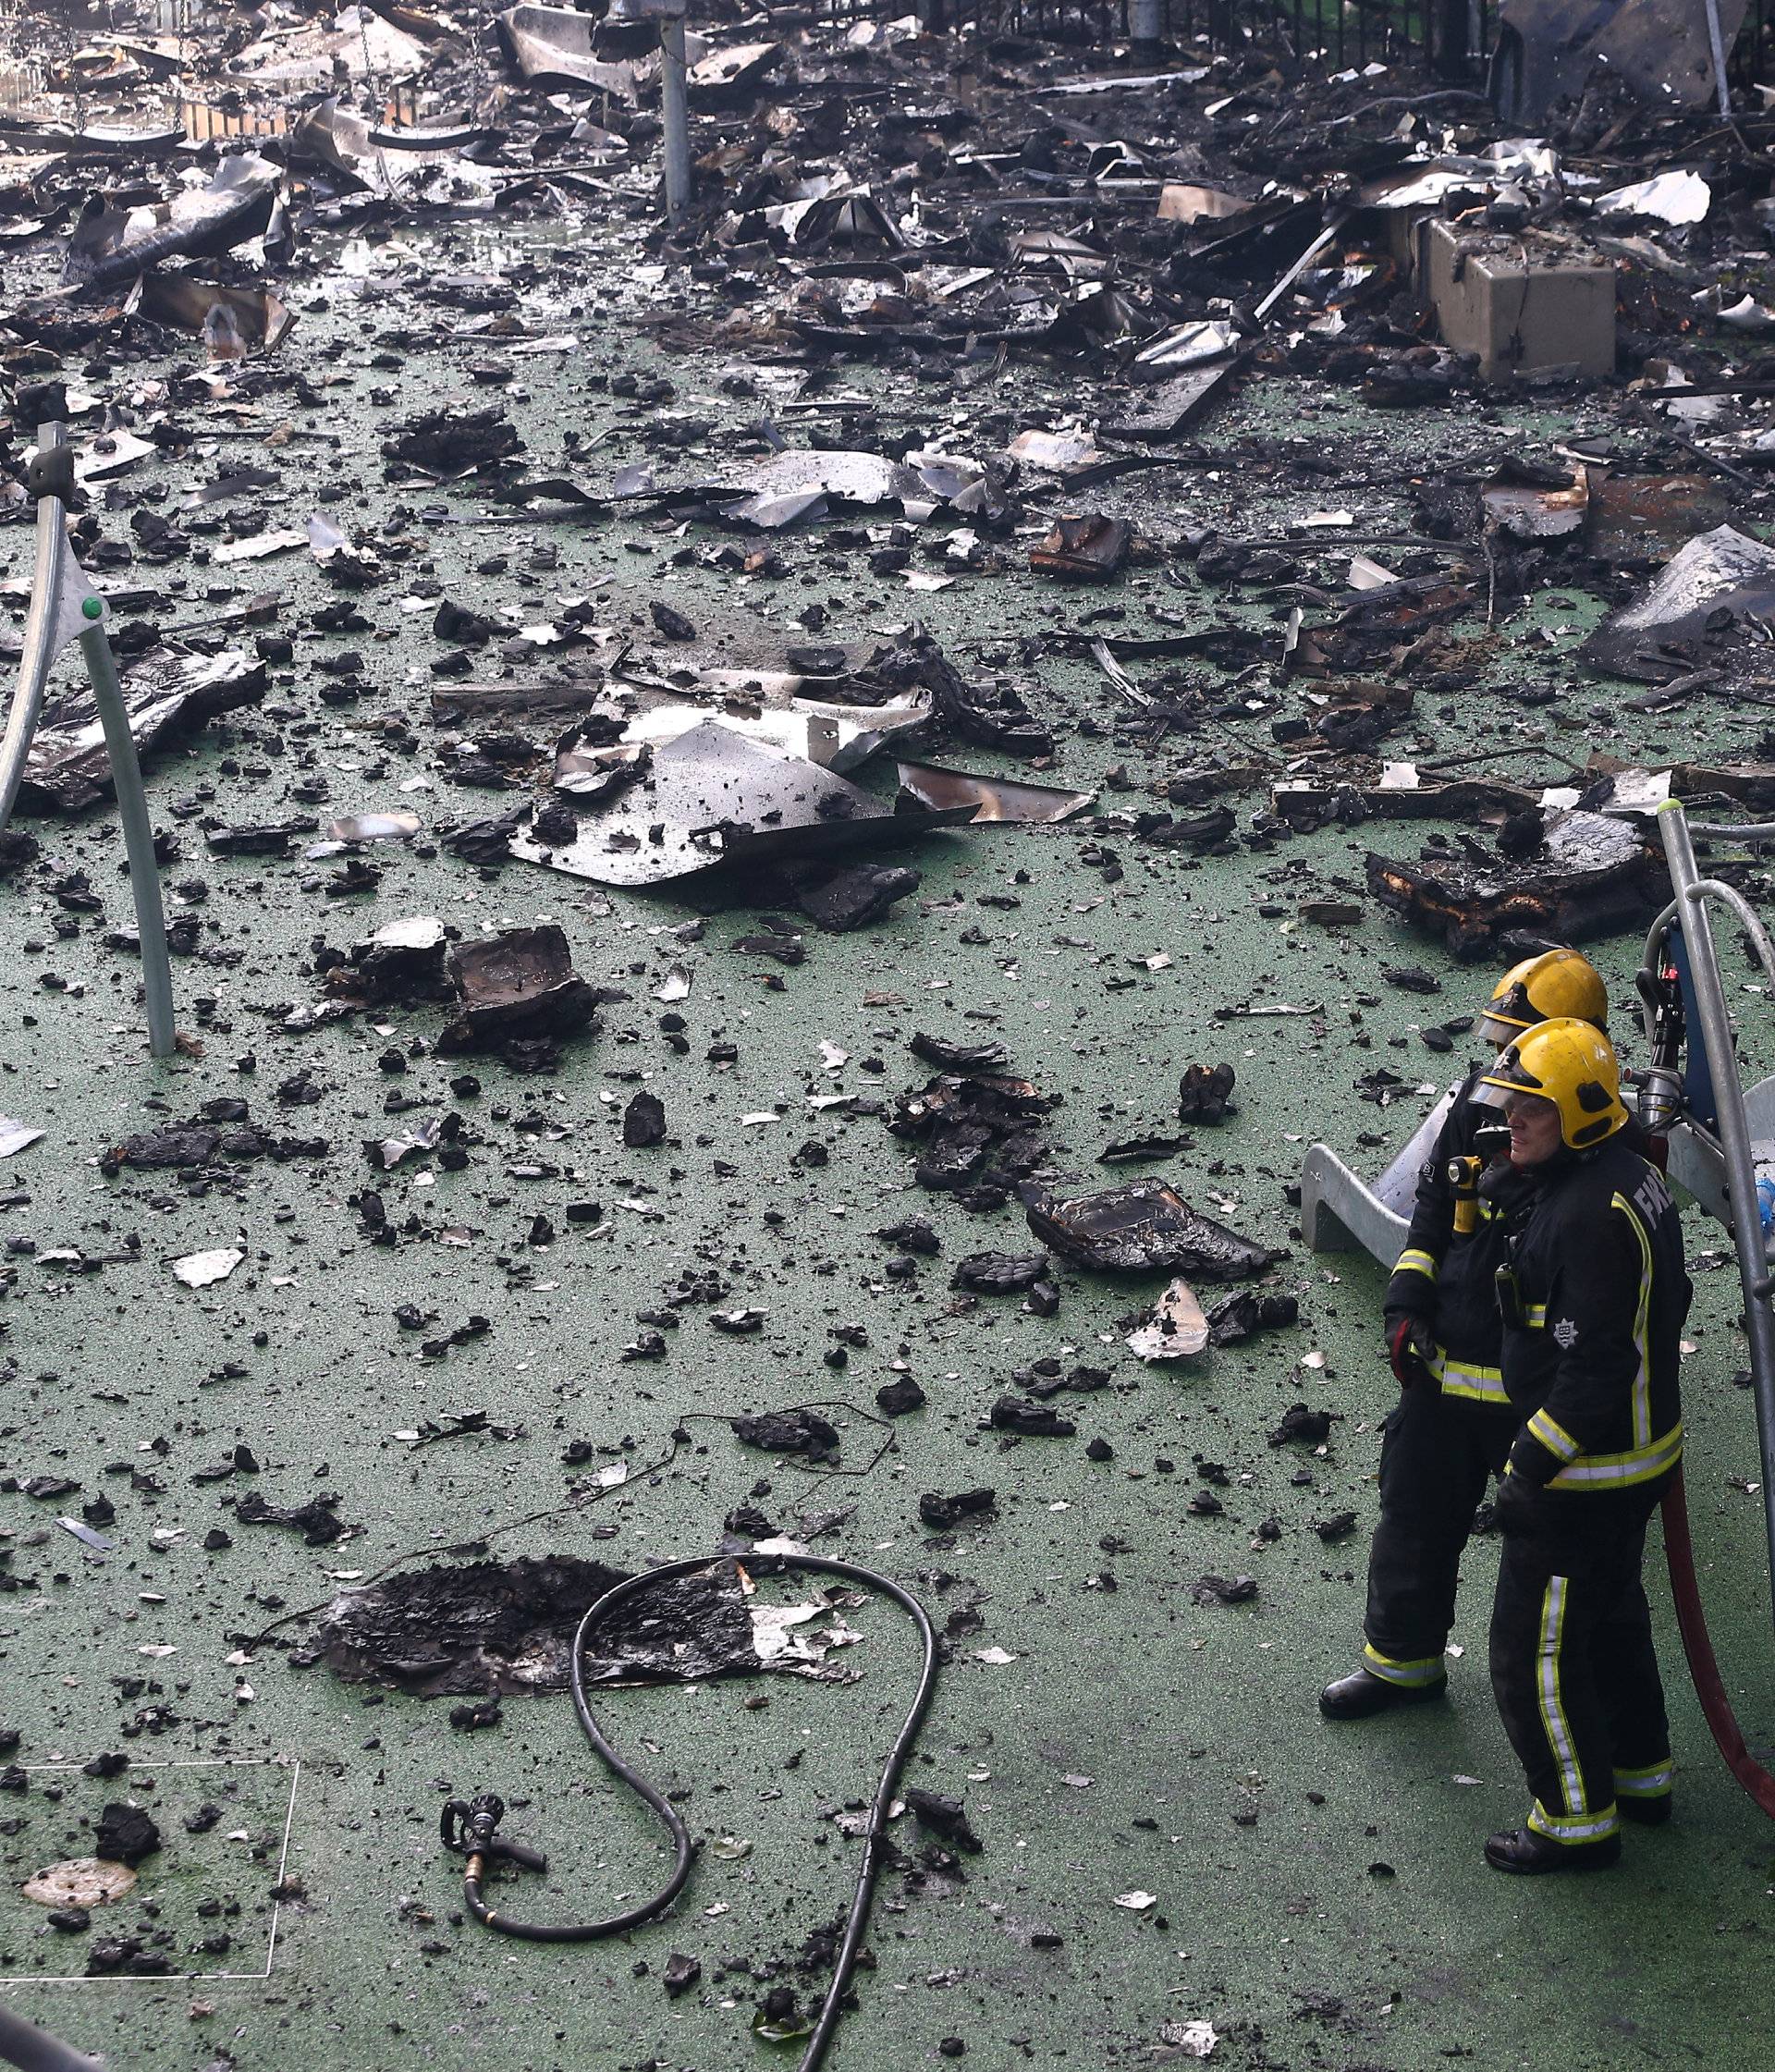 Firefighters stand amid debris in a childrens playground near a tower block severly damaged by a serious fire, in north Kensington, West London